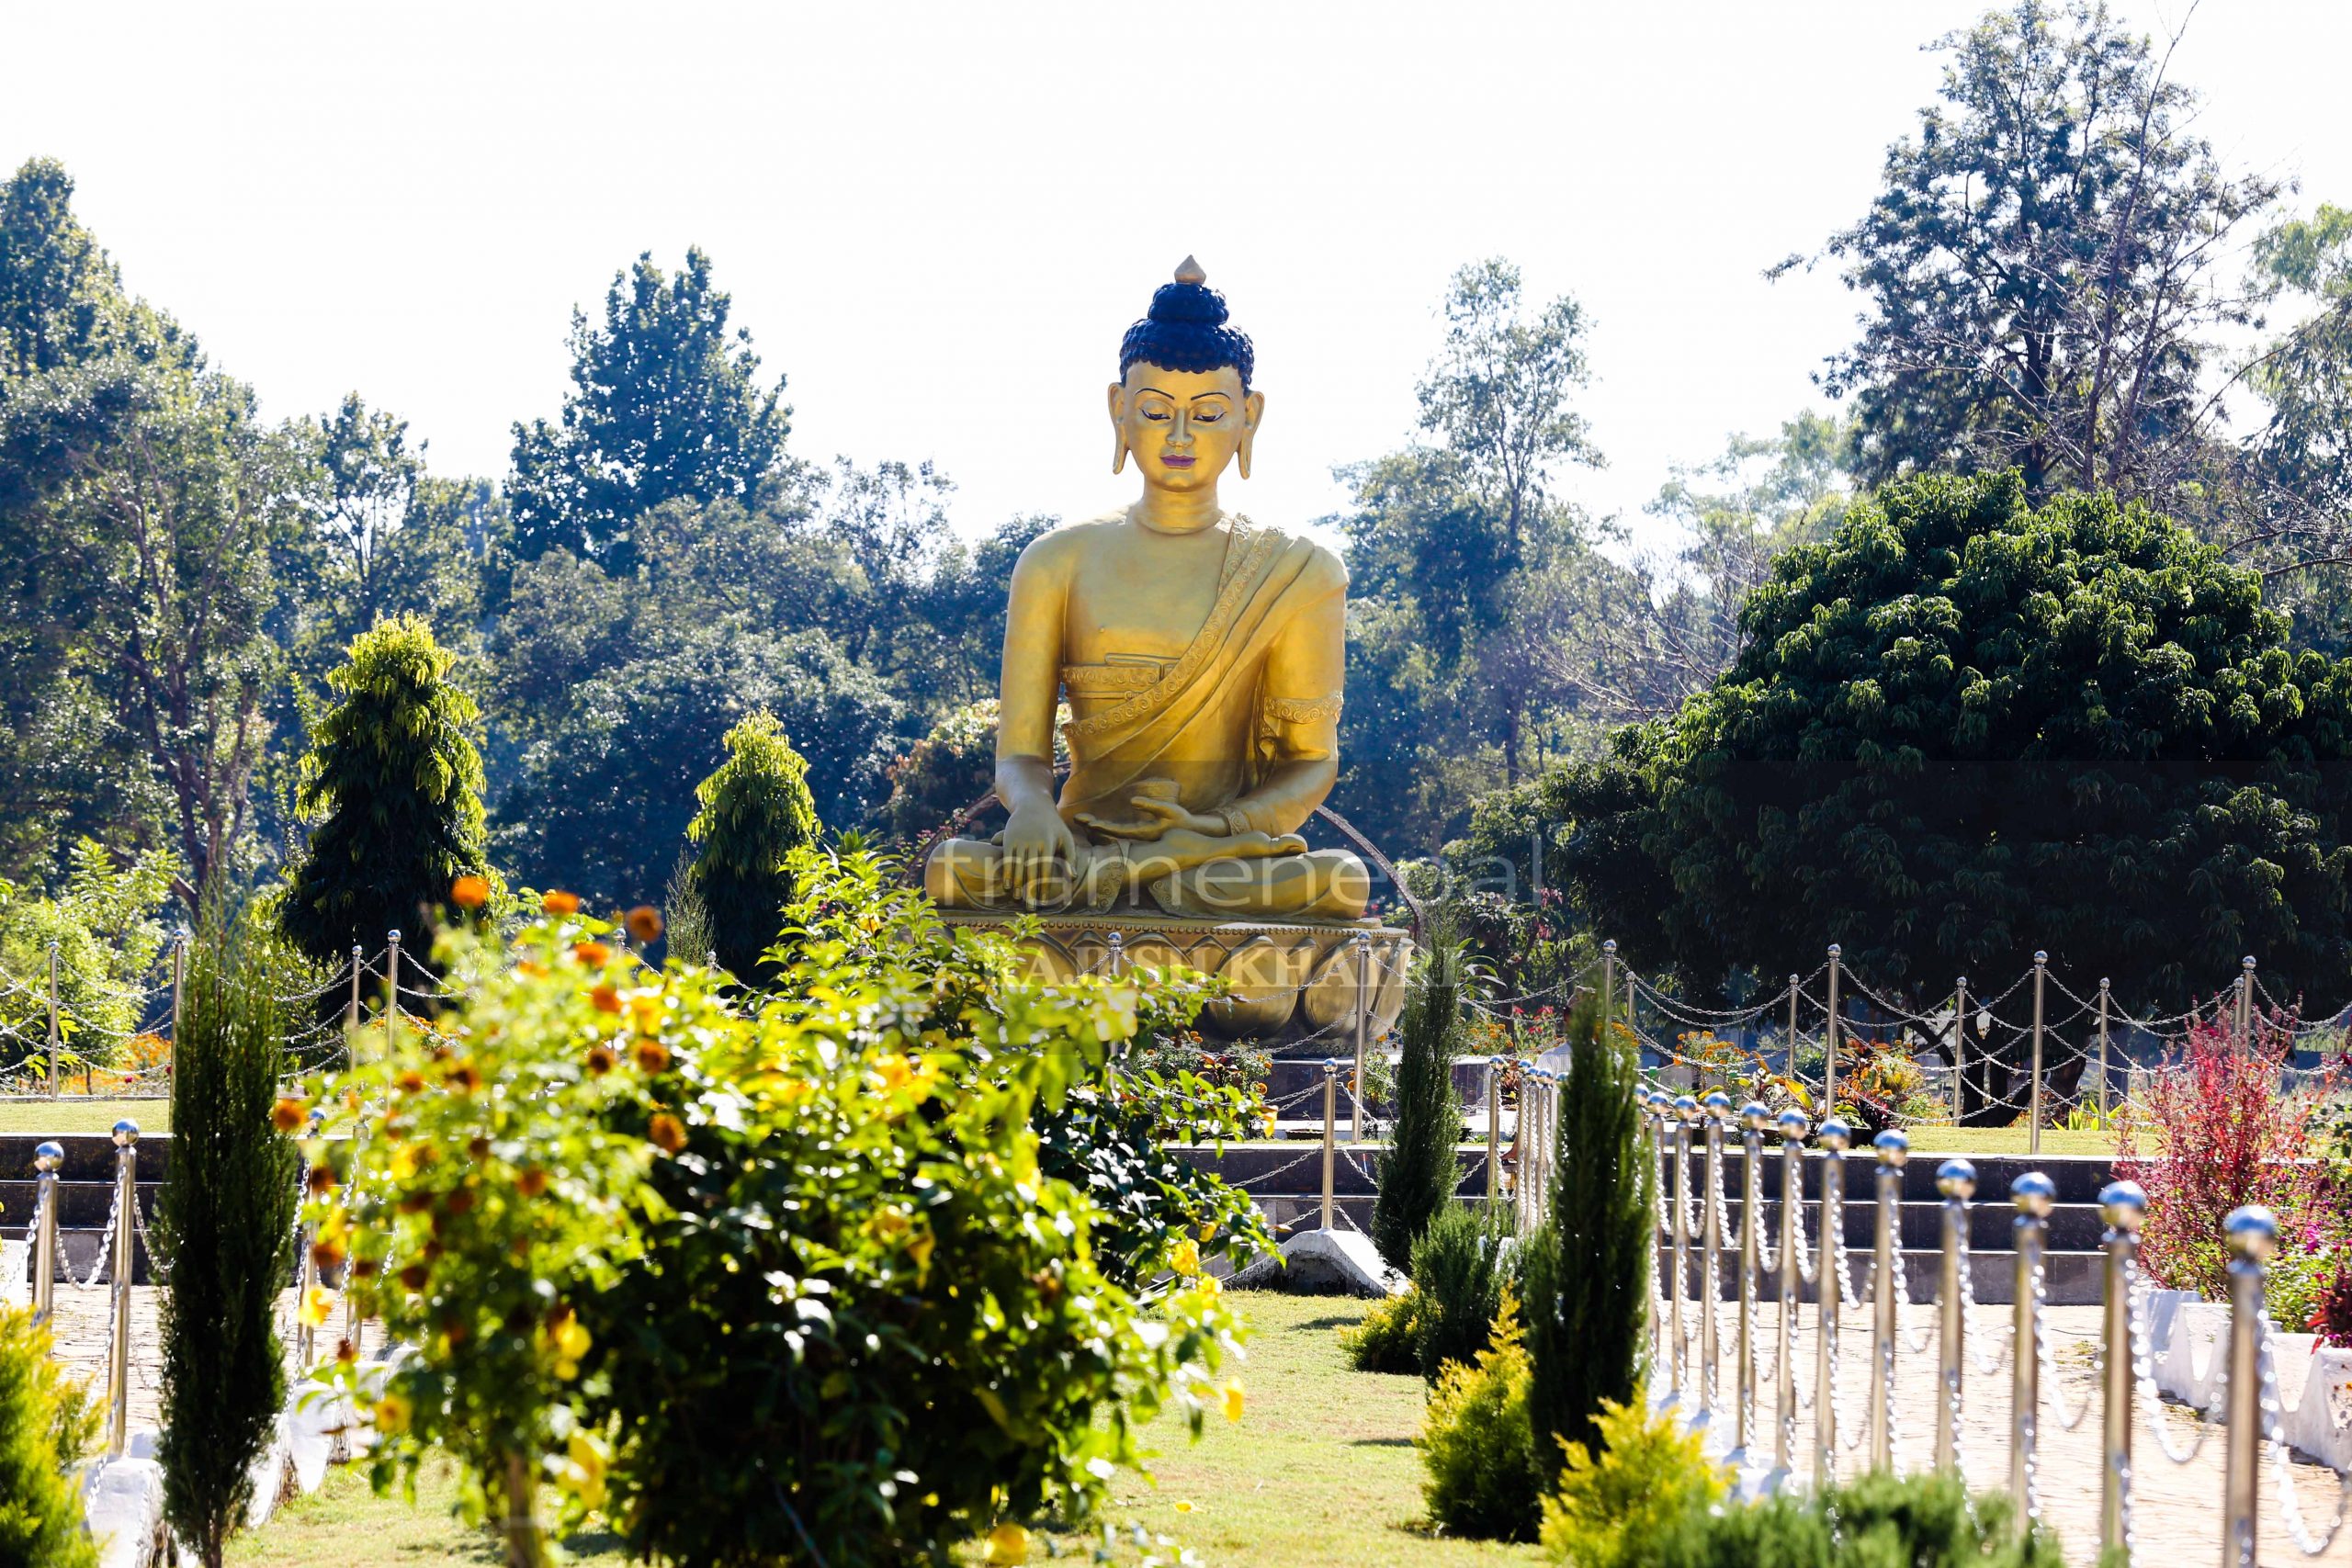 Buddha Statue in Nepal, Images for buddha statue, Buddha Statues, Happy Buddha & Tibetan Statues, buddha statue meaning, buddha statue for home, buddha statue thailand, outdoor buddha statue, buddha statue india, buddha statue online, buddha statue decor, buddha statue for sale, buddha statue meaning, buddha statue outdoor, alpine buddha statue, buddha statue gold, buddha statue white, tian tan buddha, buddha statue thailand, buddha statue decor, buddha statue in china, happy buddha statue, buddha statue singapore, buddha statues meaning, buddha statue india, buddha statue for home, buddharupa,